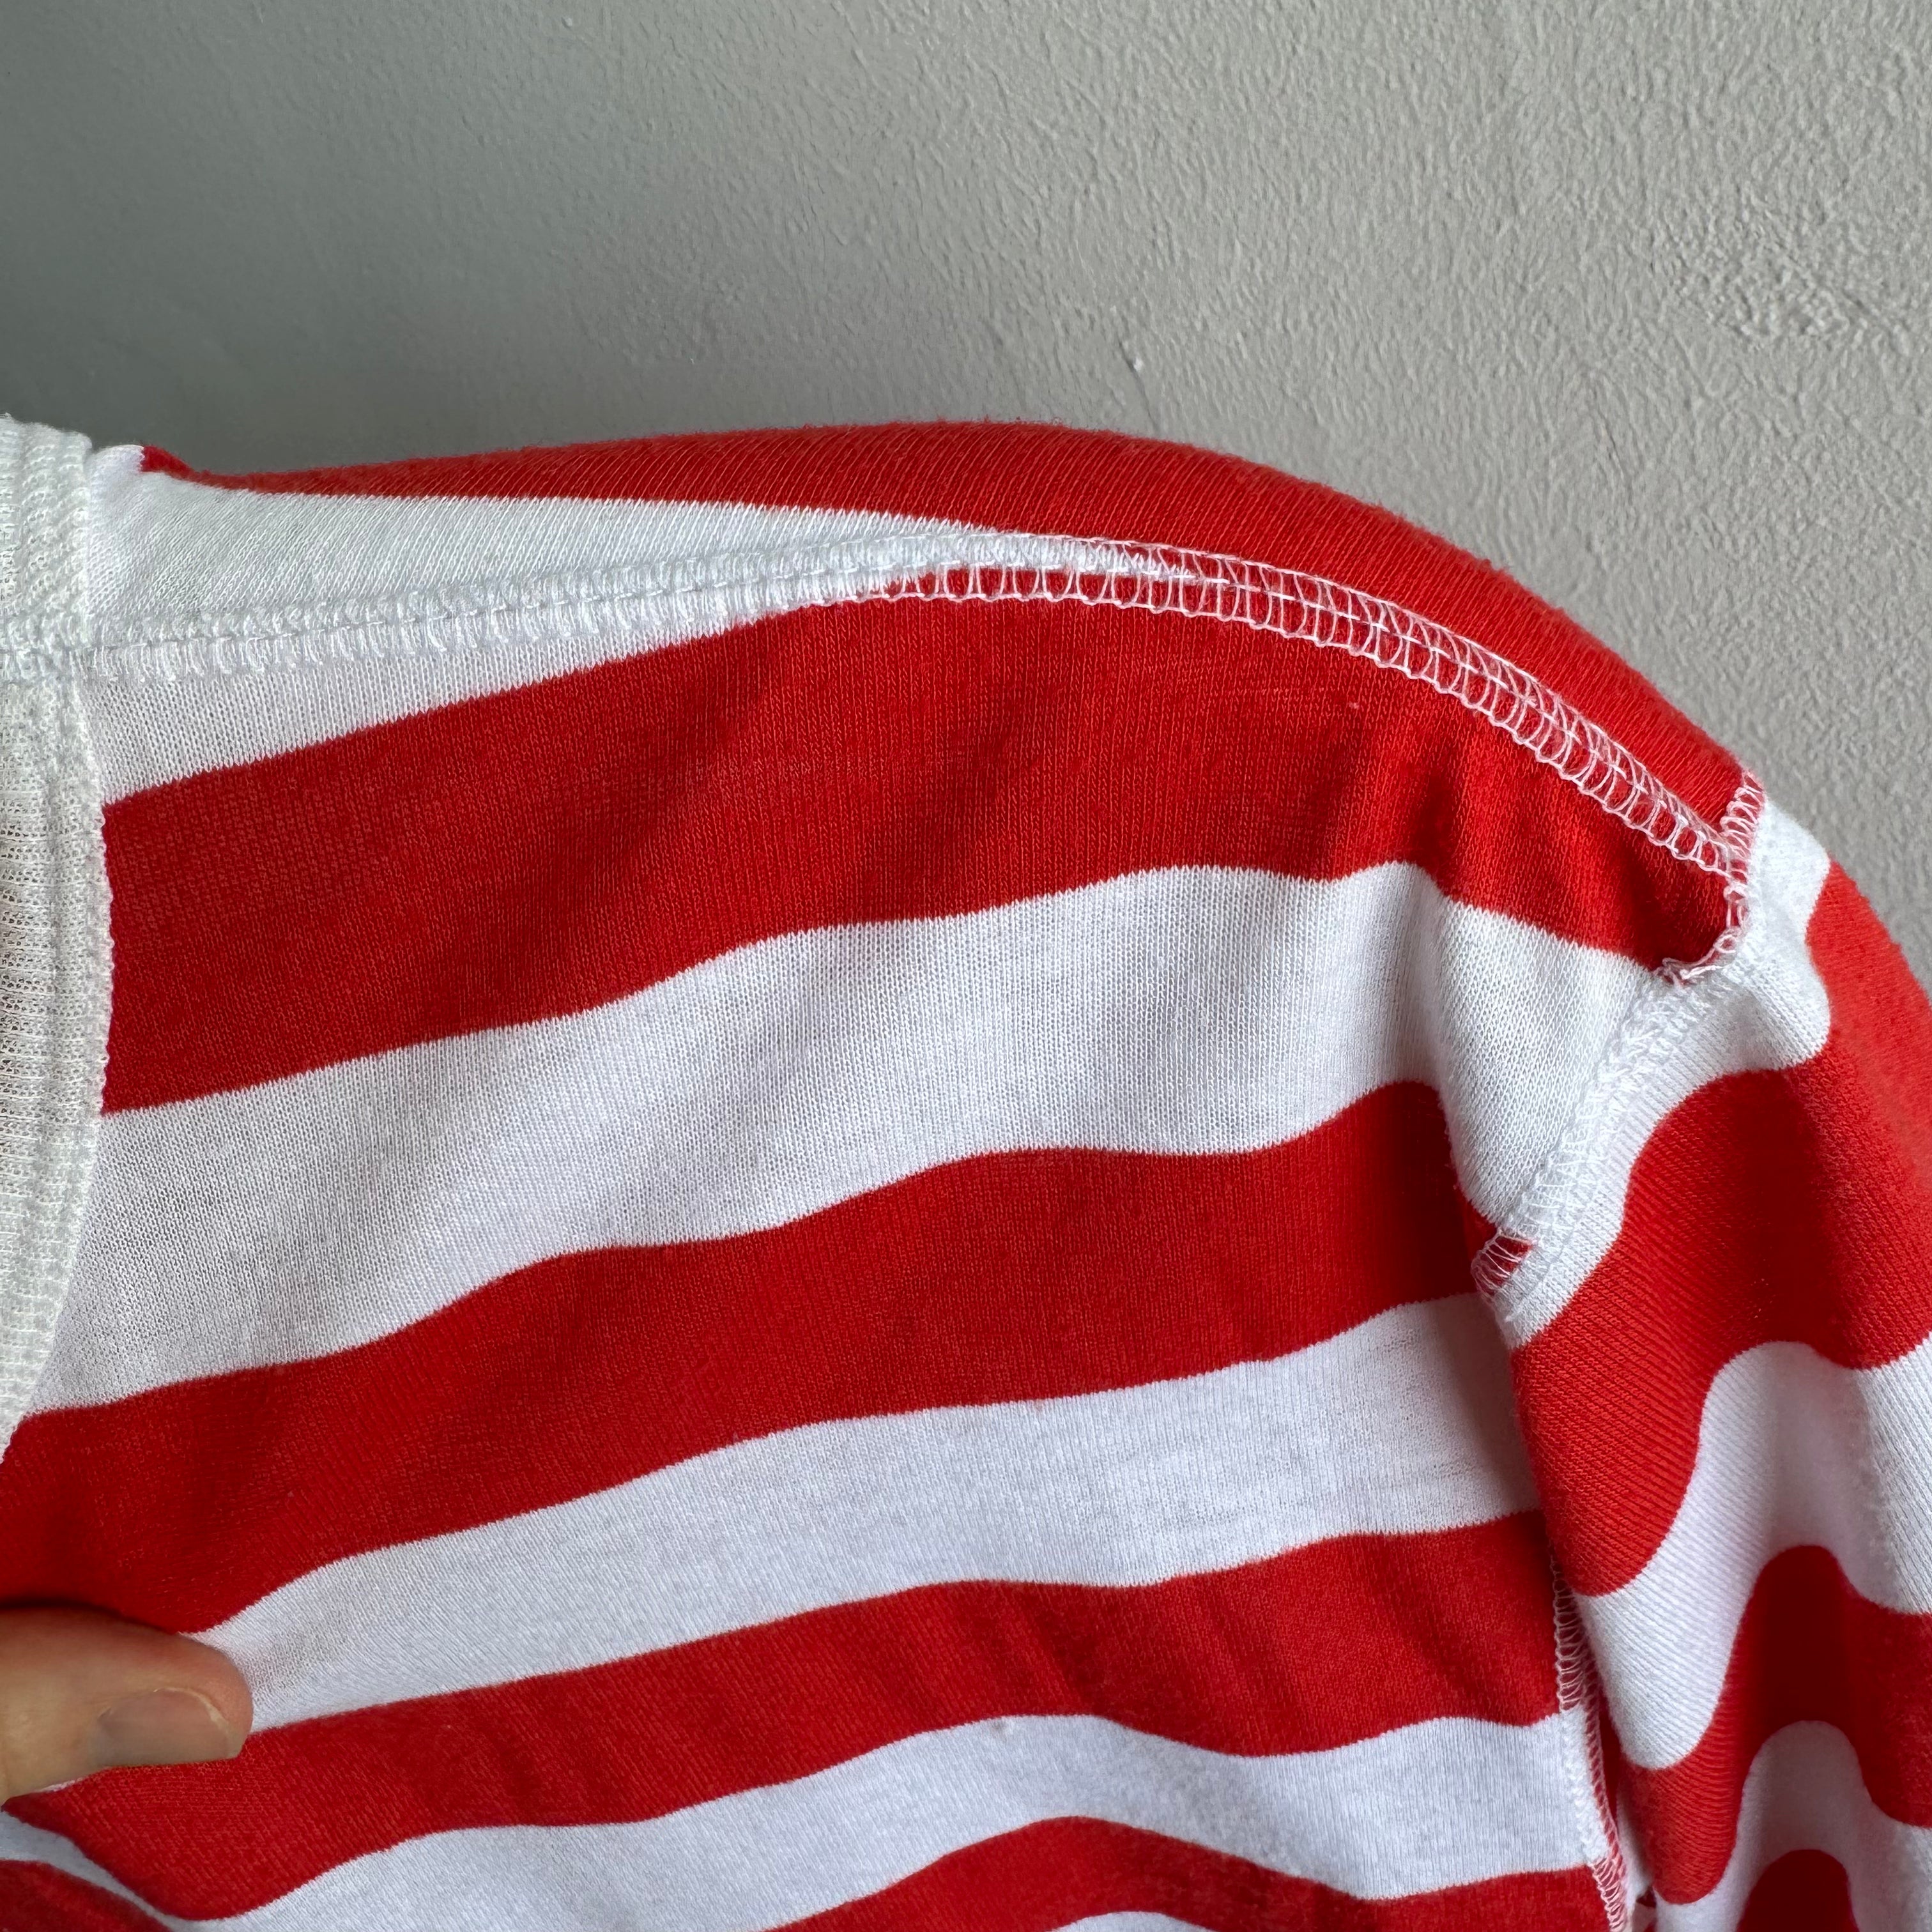 1980s Thin and Slouchy Red and White Striped T-Shirt